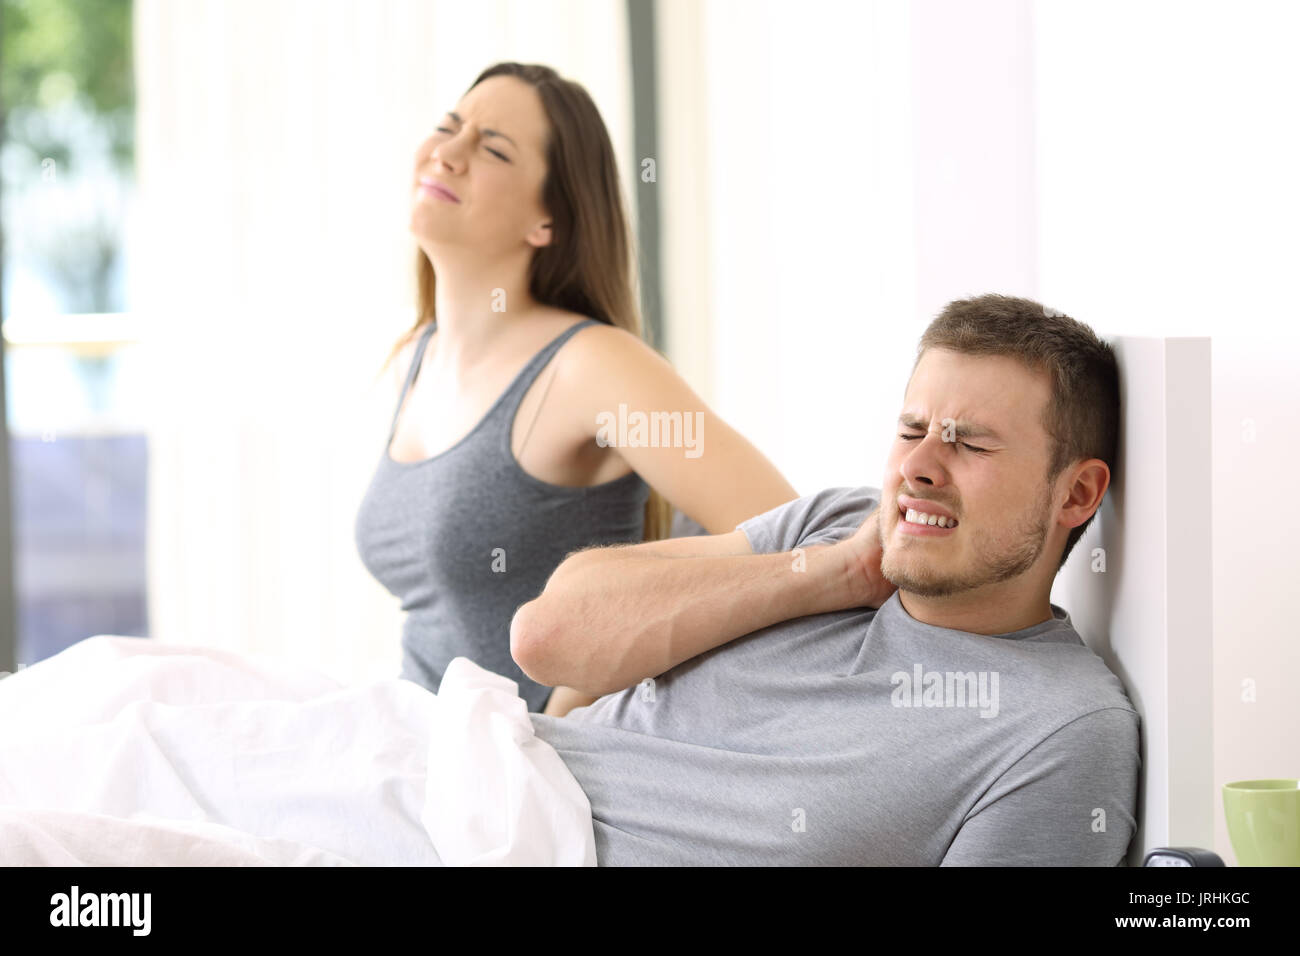 Couple waking up suffering ache after a bad night in a not comfortable bed at home or hotel room Stock Photo